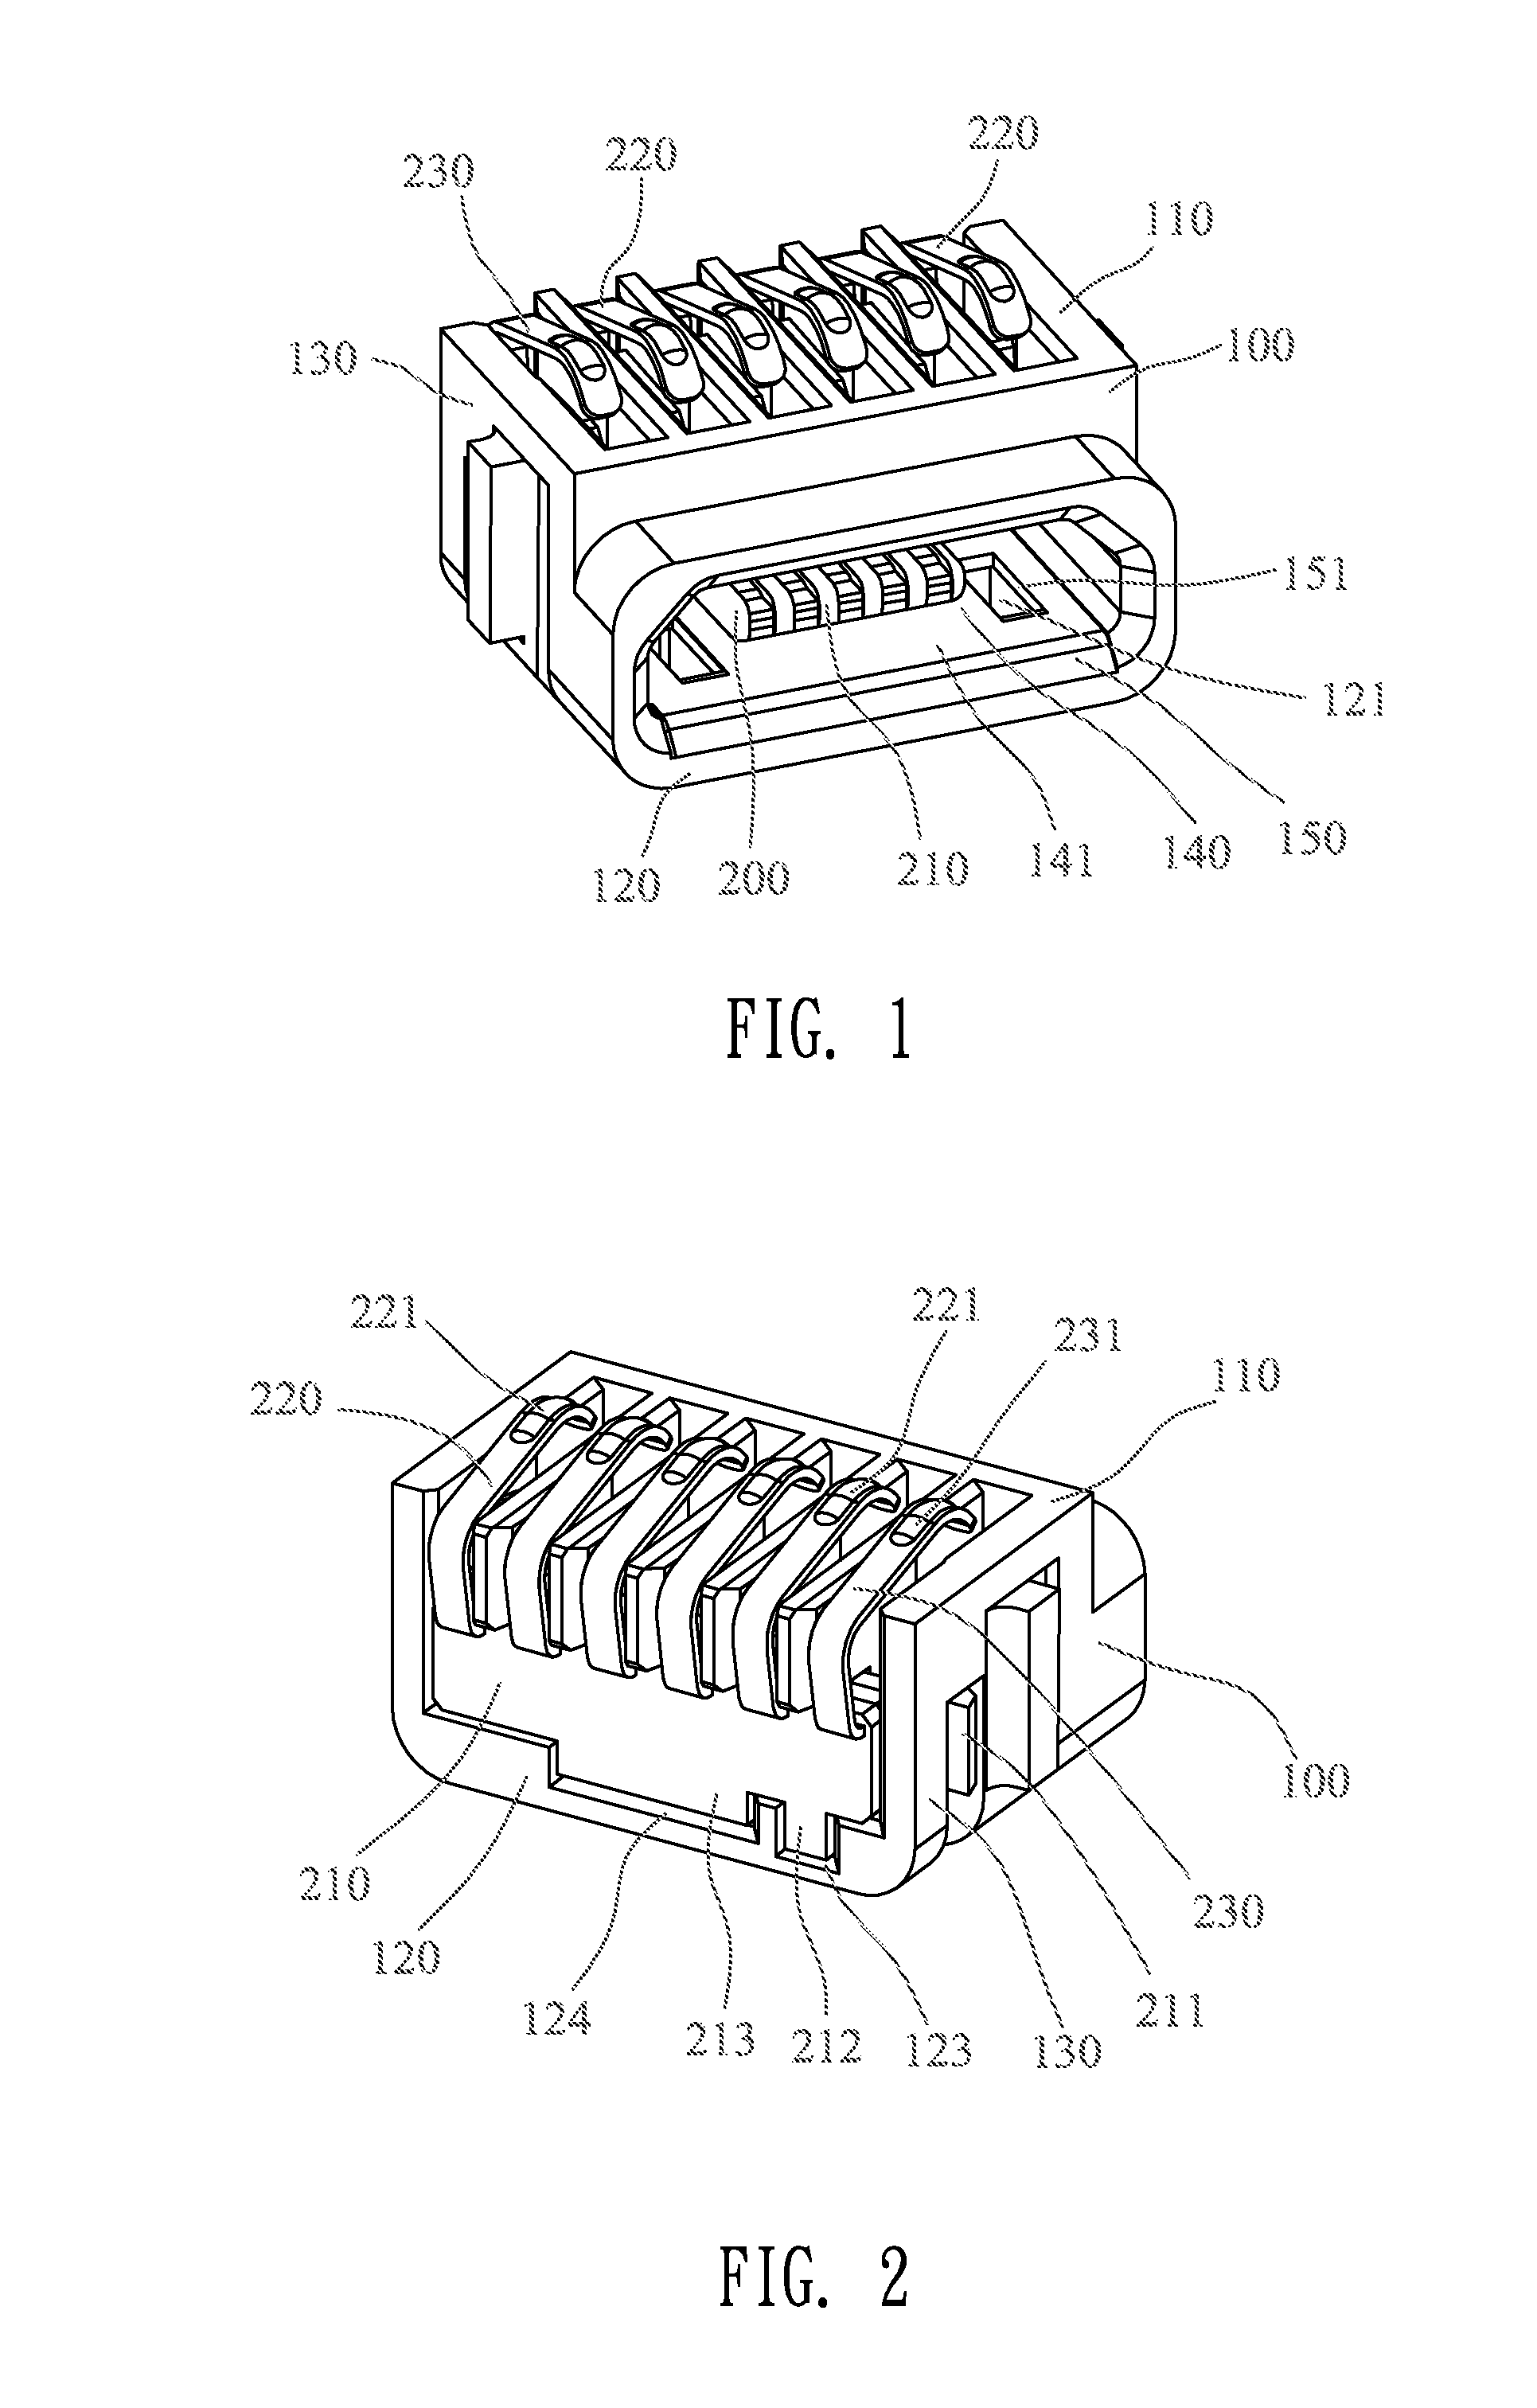 Electronic connector with grounding metal plate